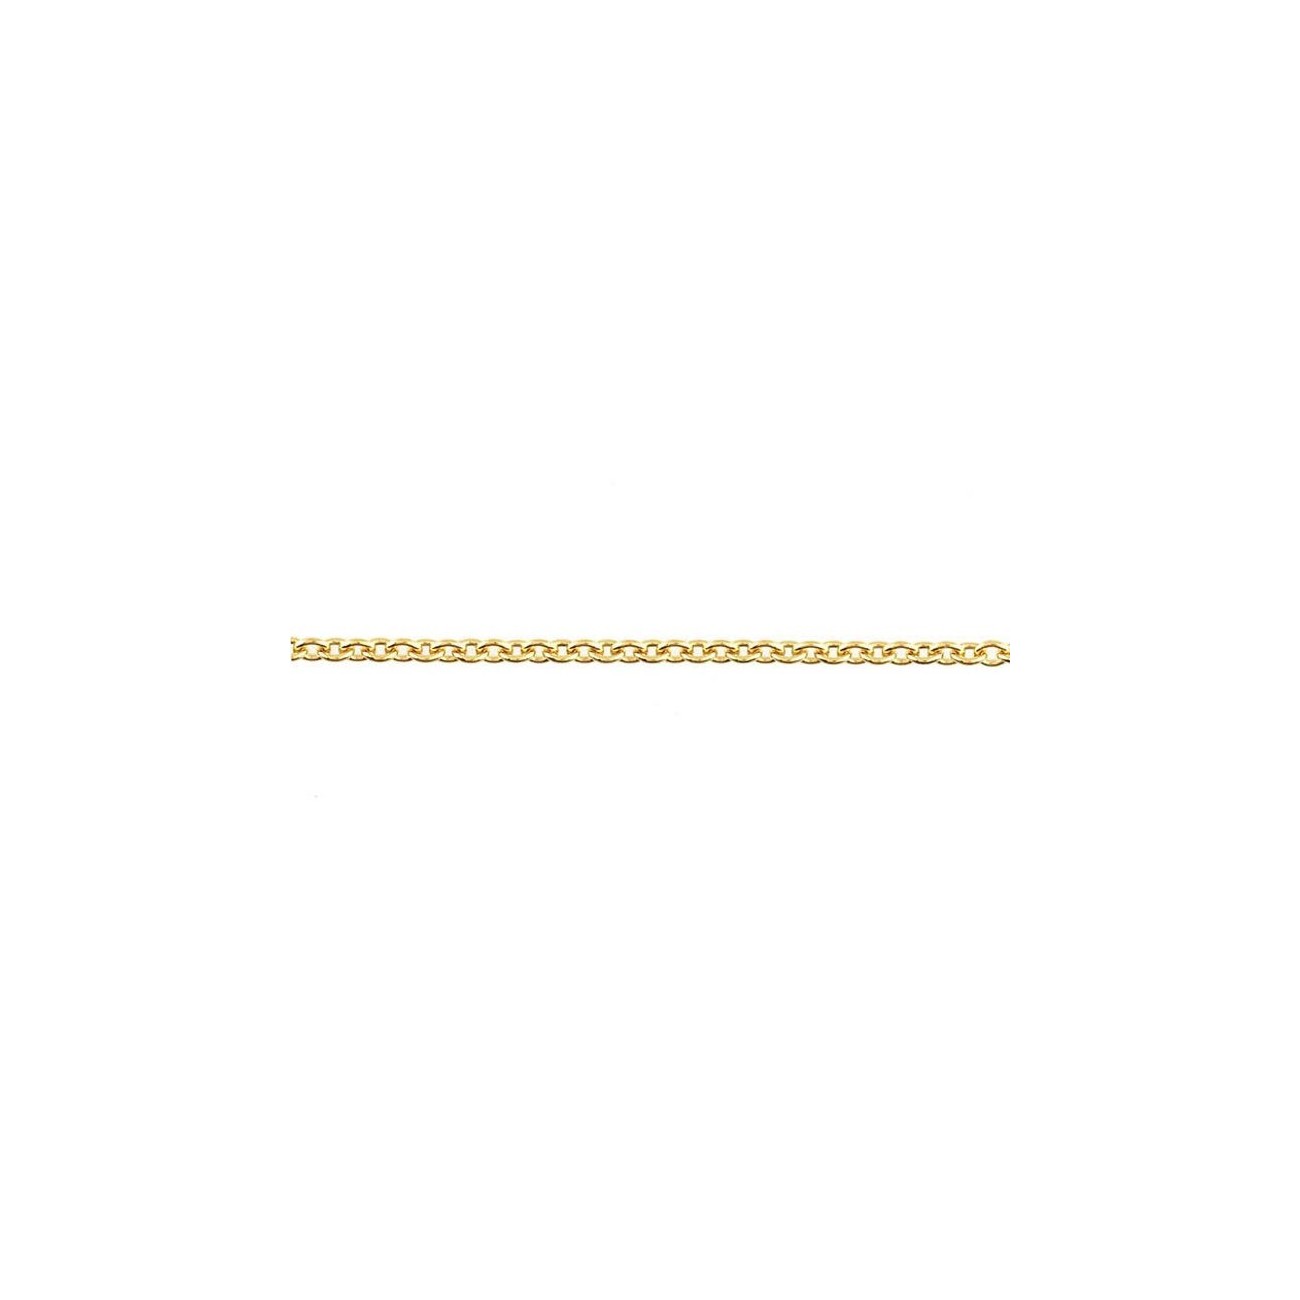 CADENA GOLD FILLED CABLE OVAL 1,80MM (1 CM)